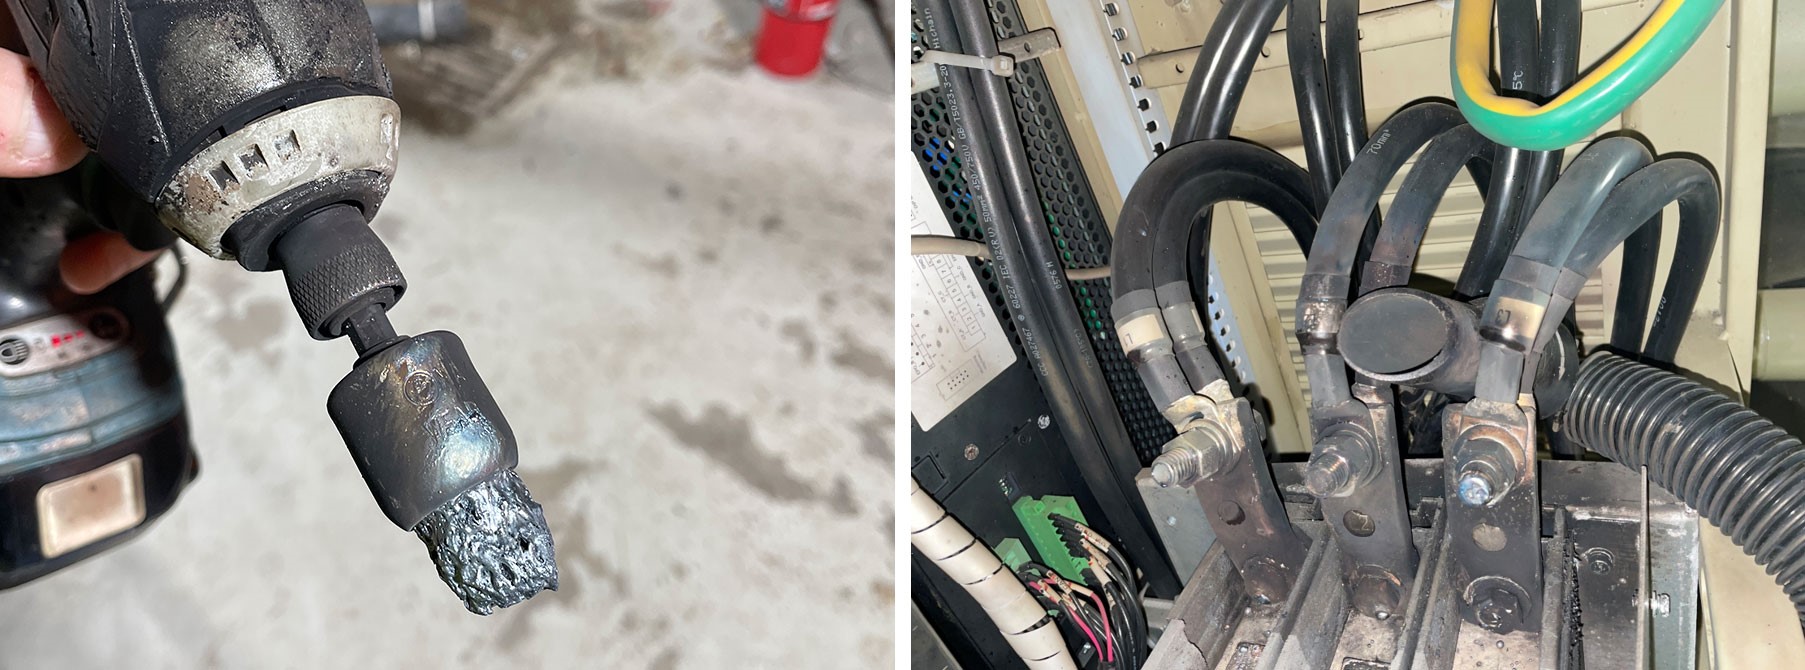 The image on the left shows the metal brush attachment which melted and fused as a result of the arc flash. The image on the right shows the cable lugs and terminals that were live at the time of the incident.